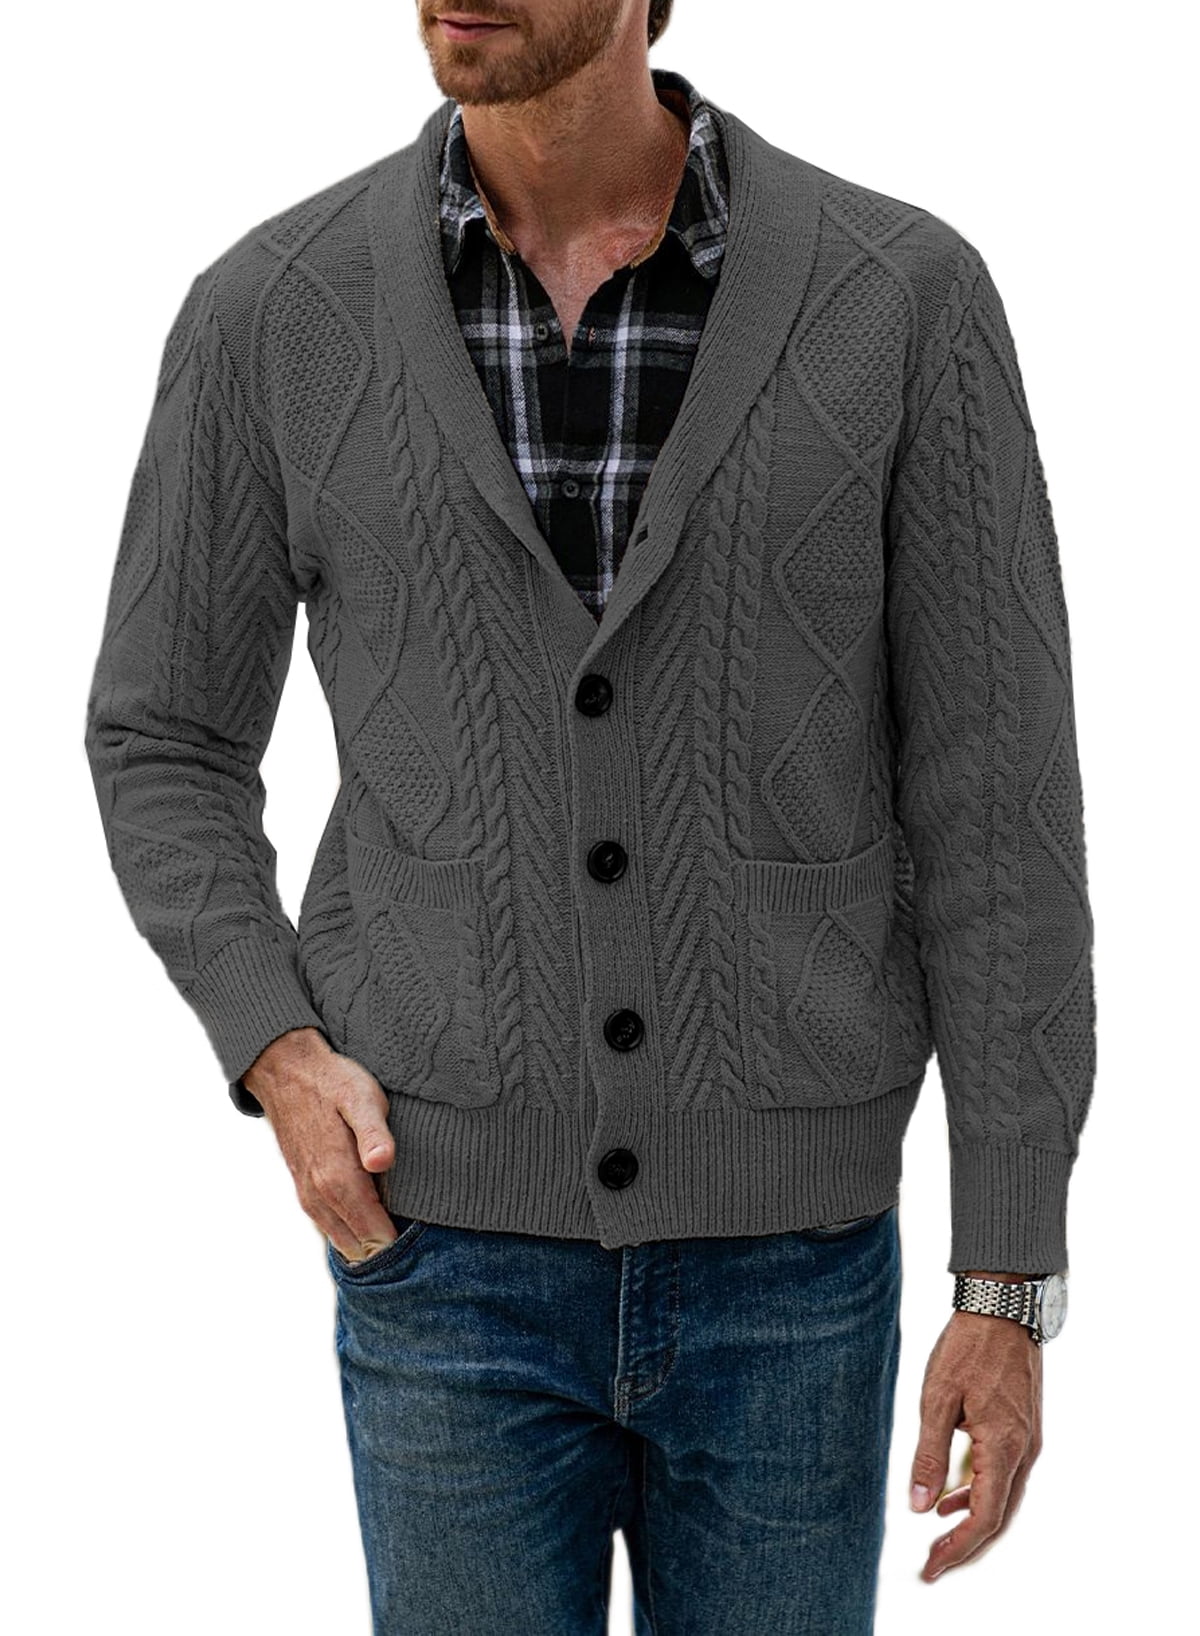 JMIERR Men's Cardigan Knitted Shawl Collar Sweaters Cable Knit Jumper ...